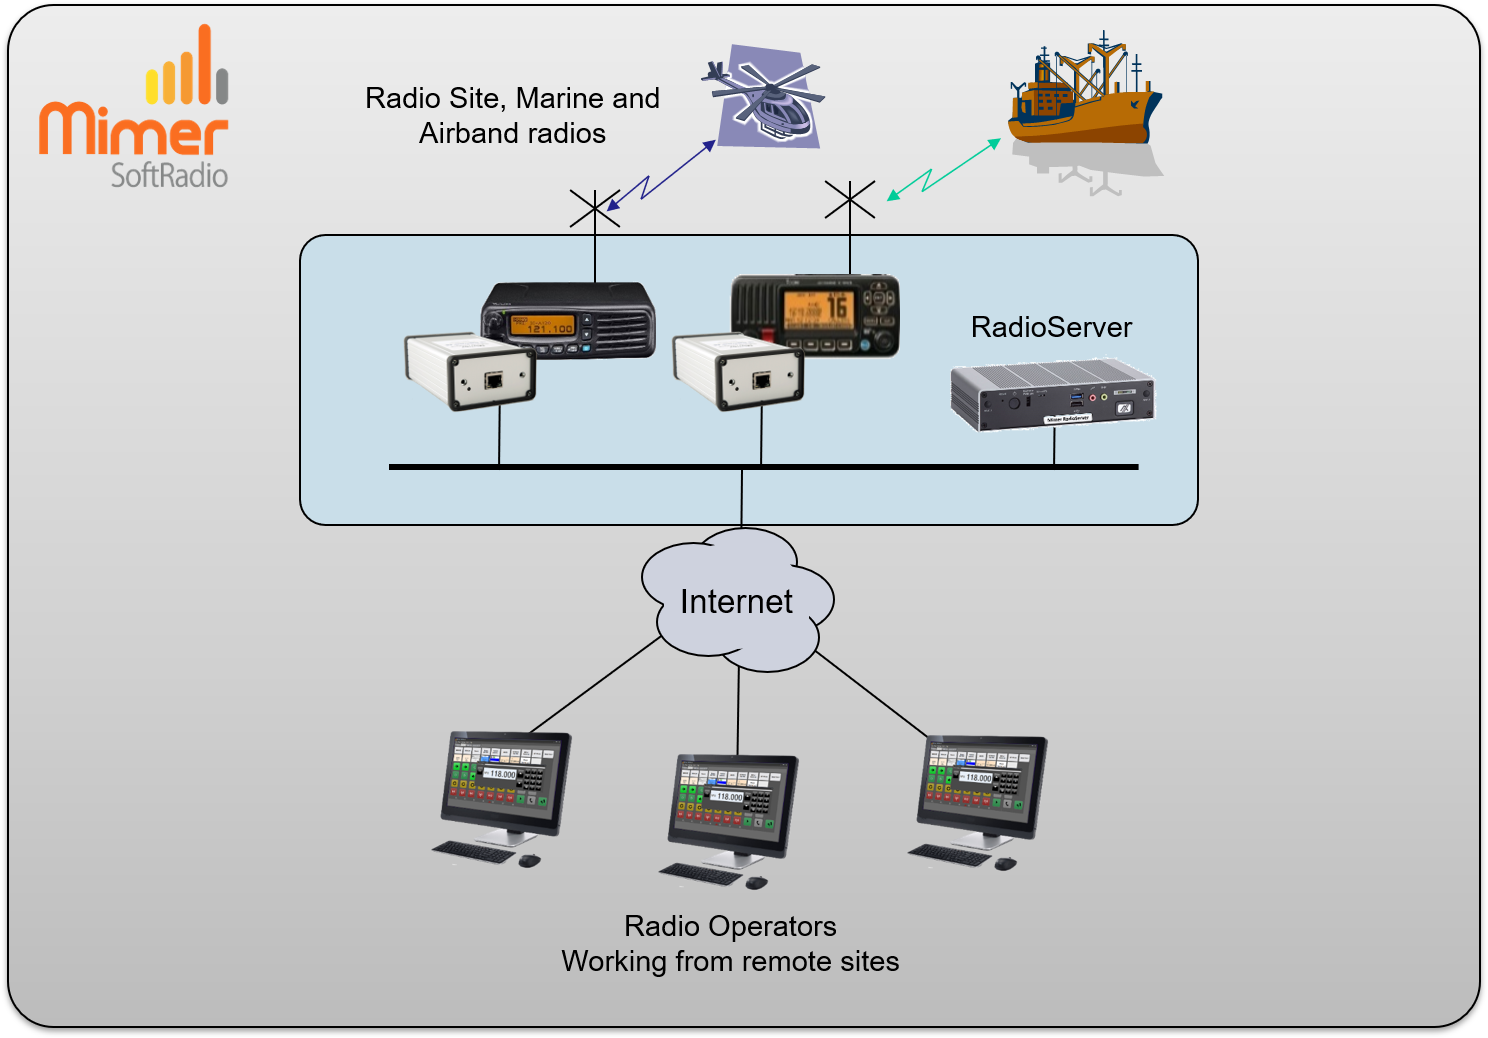 Remote system with the operators at different sites